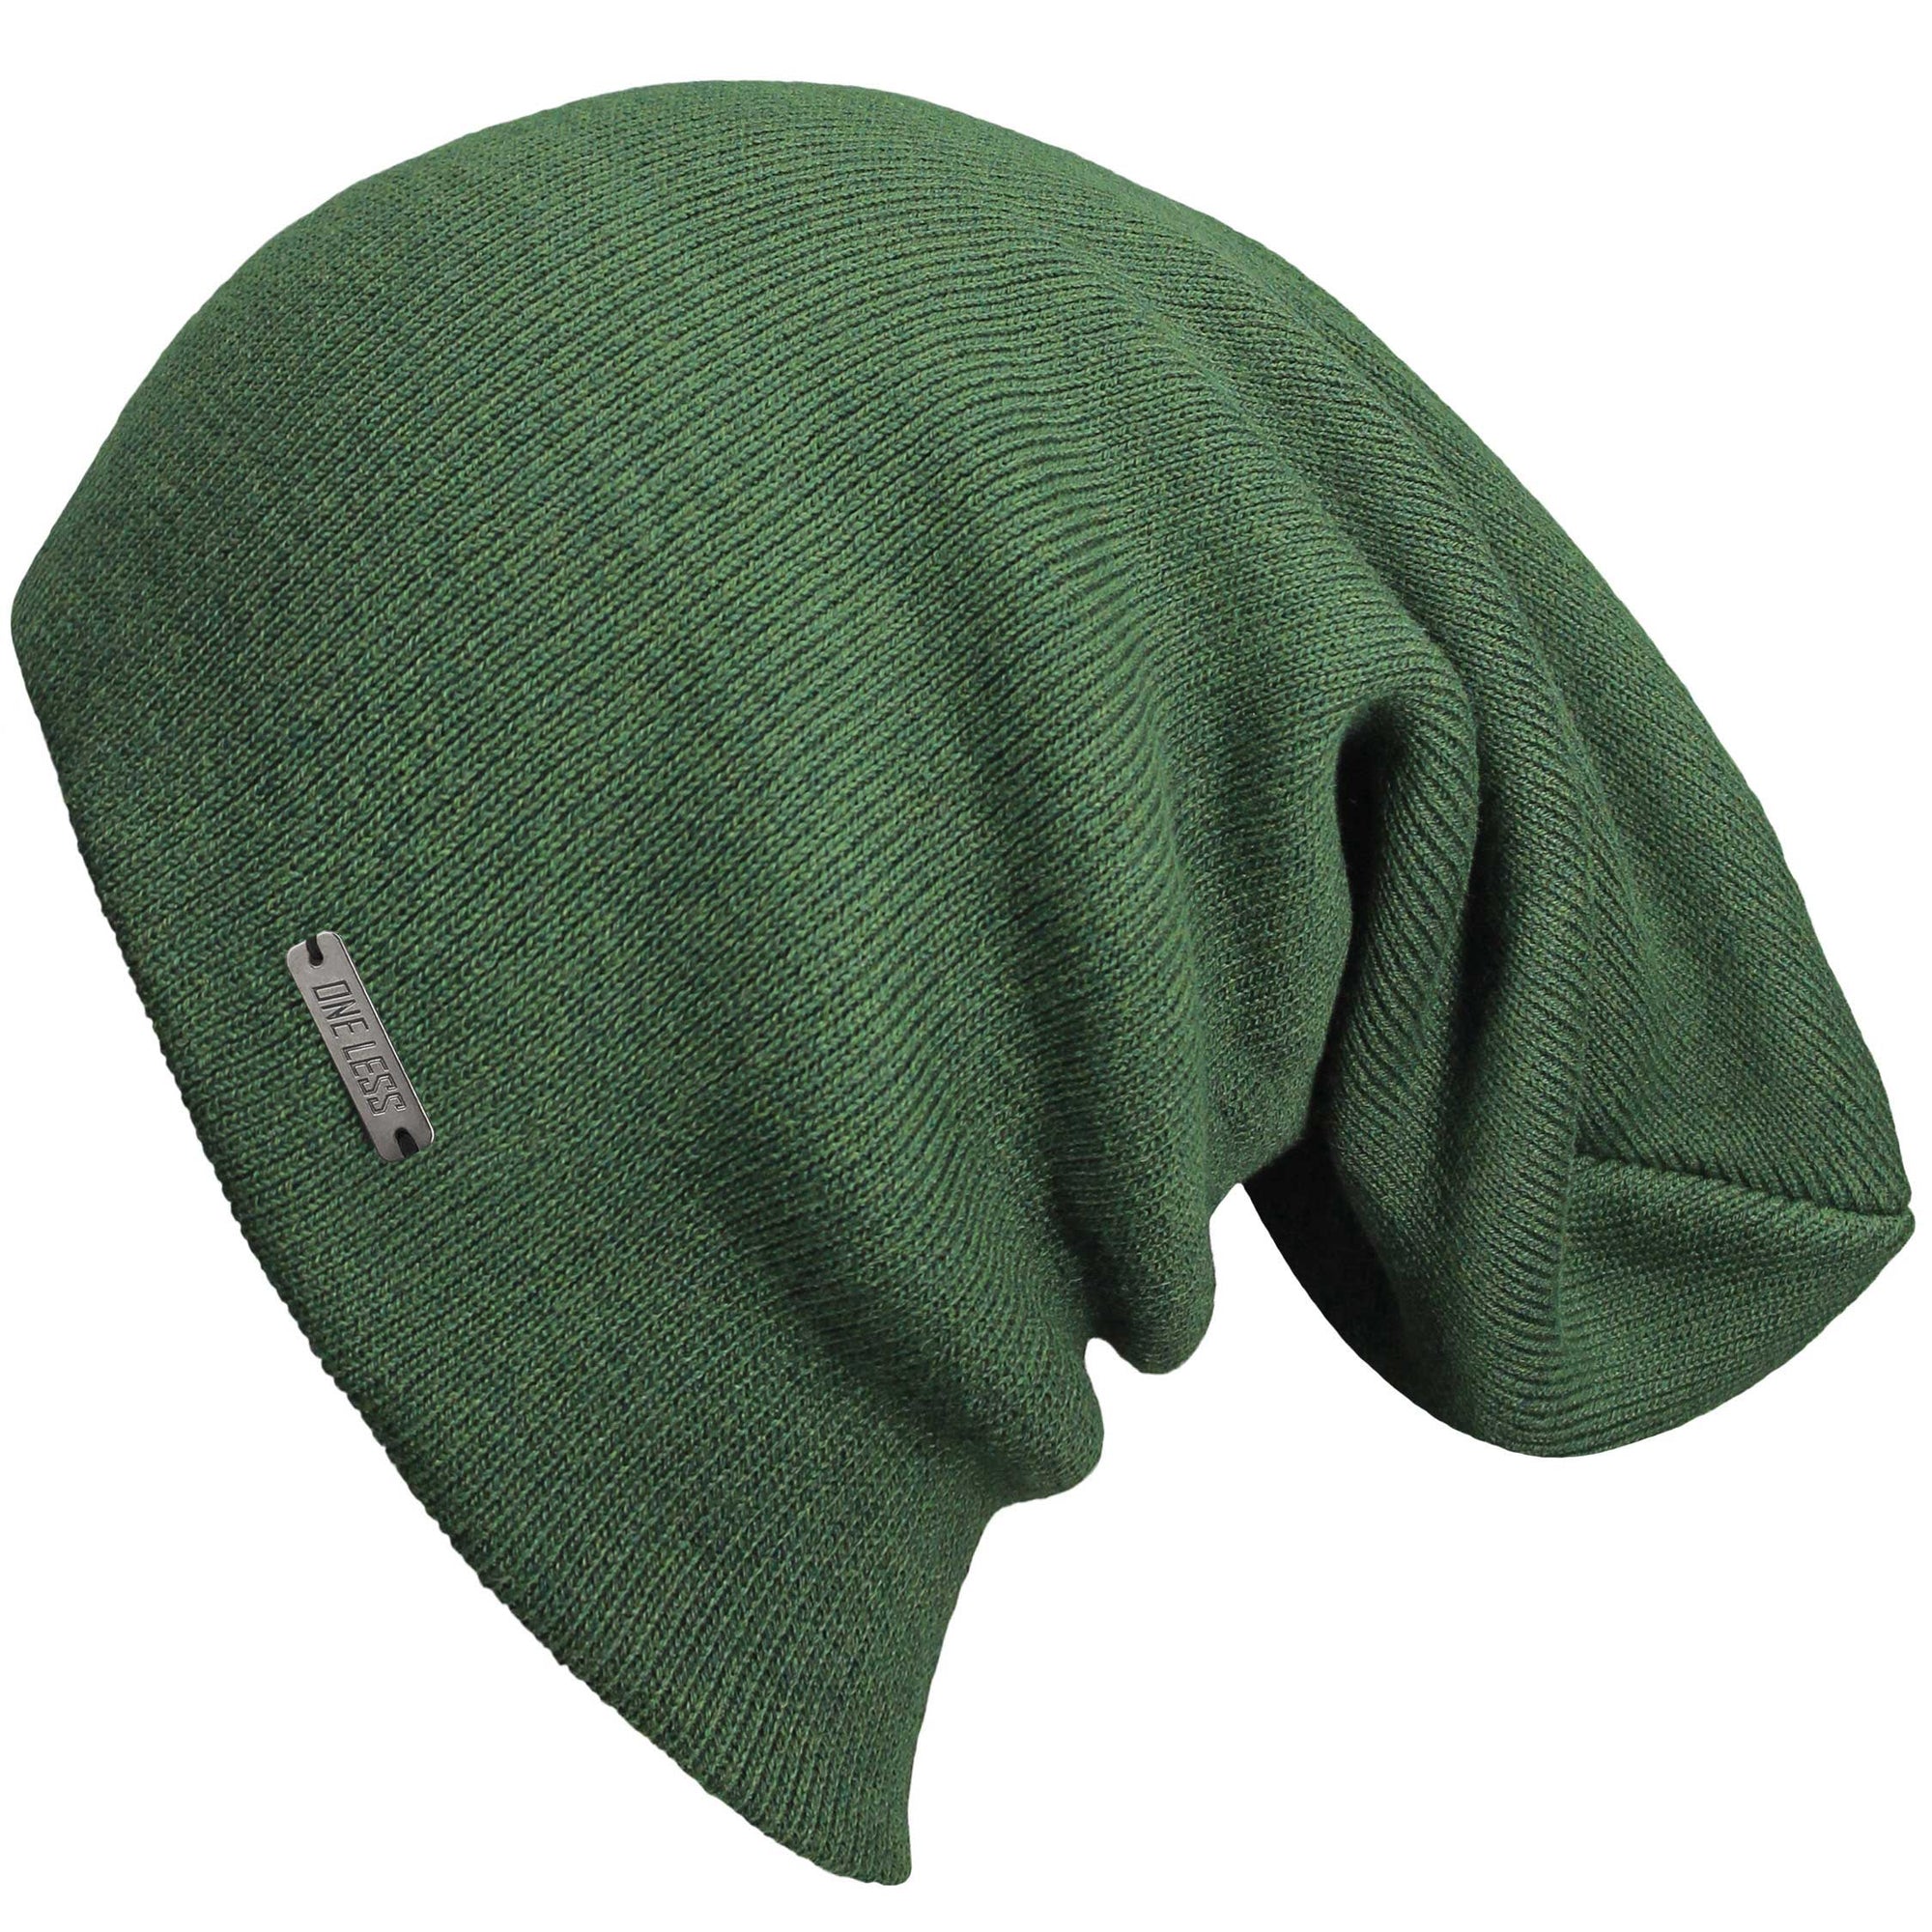 Mens XL Performance Beanie Supply Fleece Fifth - Outlier and Flex The King 